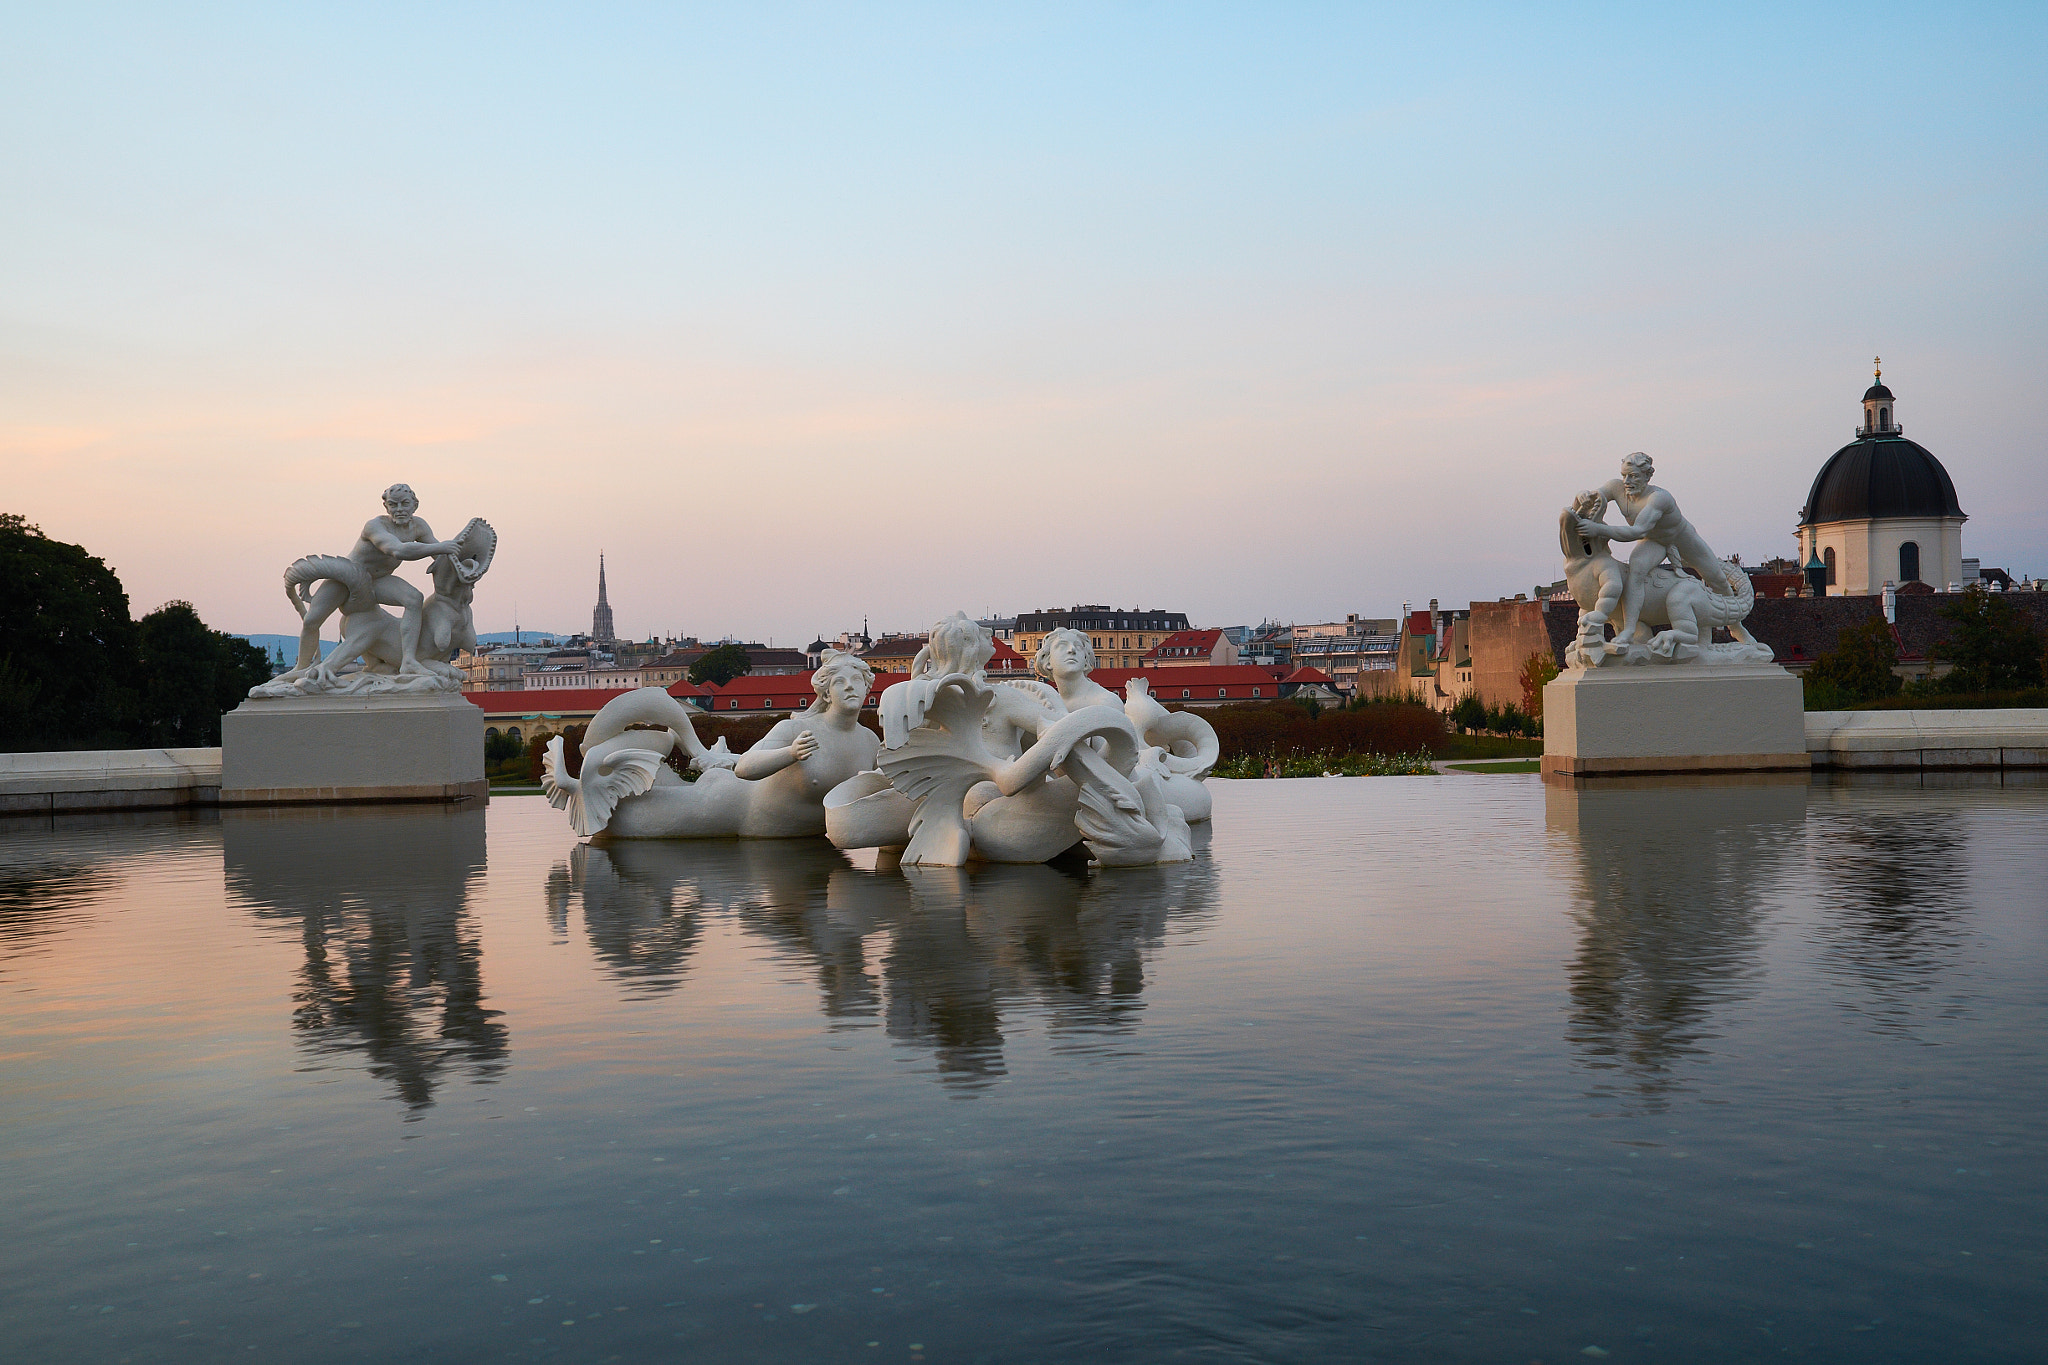 Fujifilm X-Pro1 sample photo. One evening at the belvedere palace photography